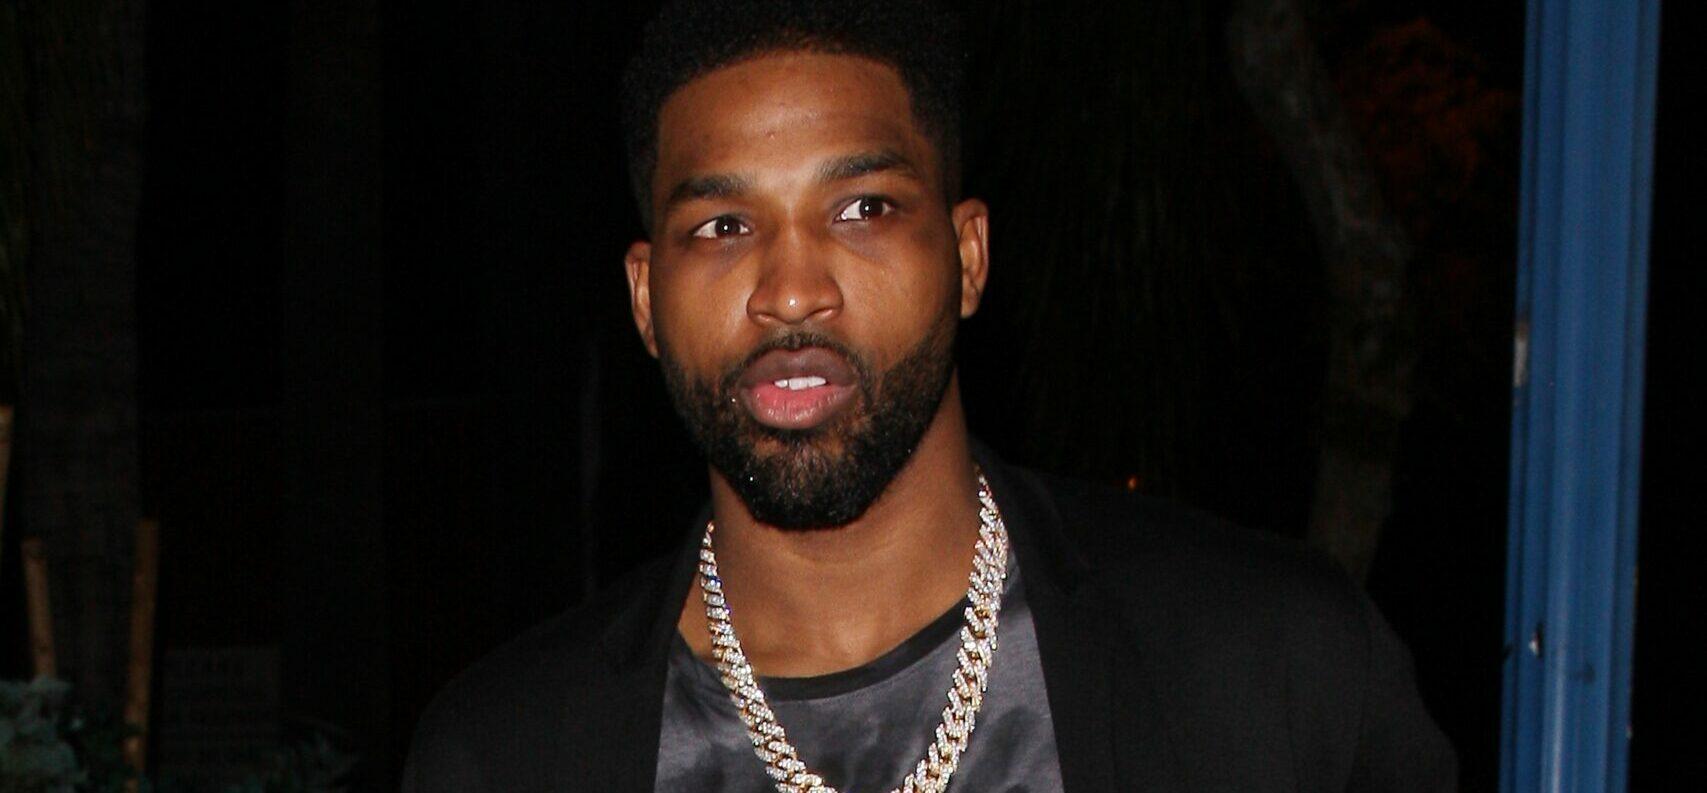 Tristan Thompson Returns To Social Media, Stays Silent About Mother’s Passing